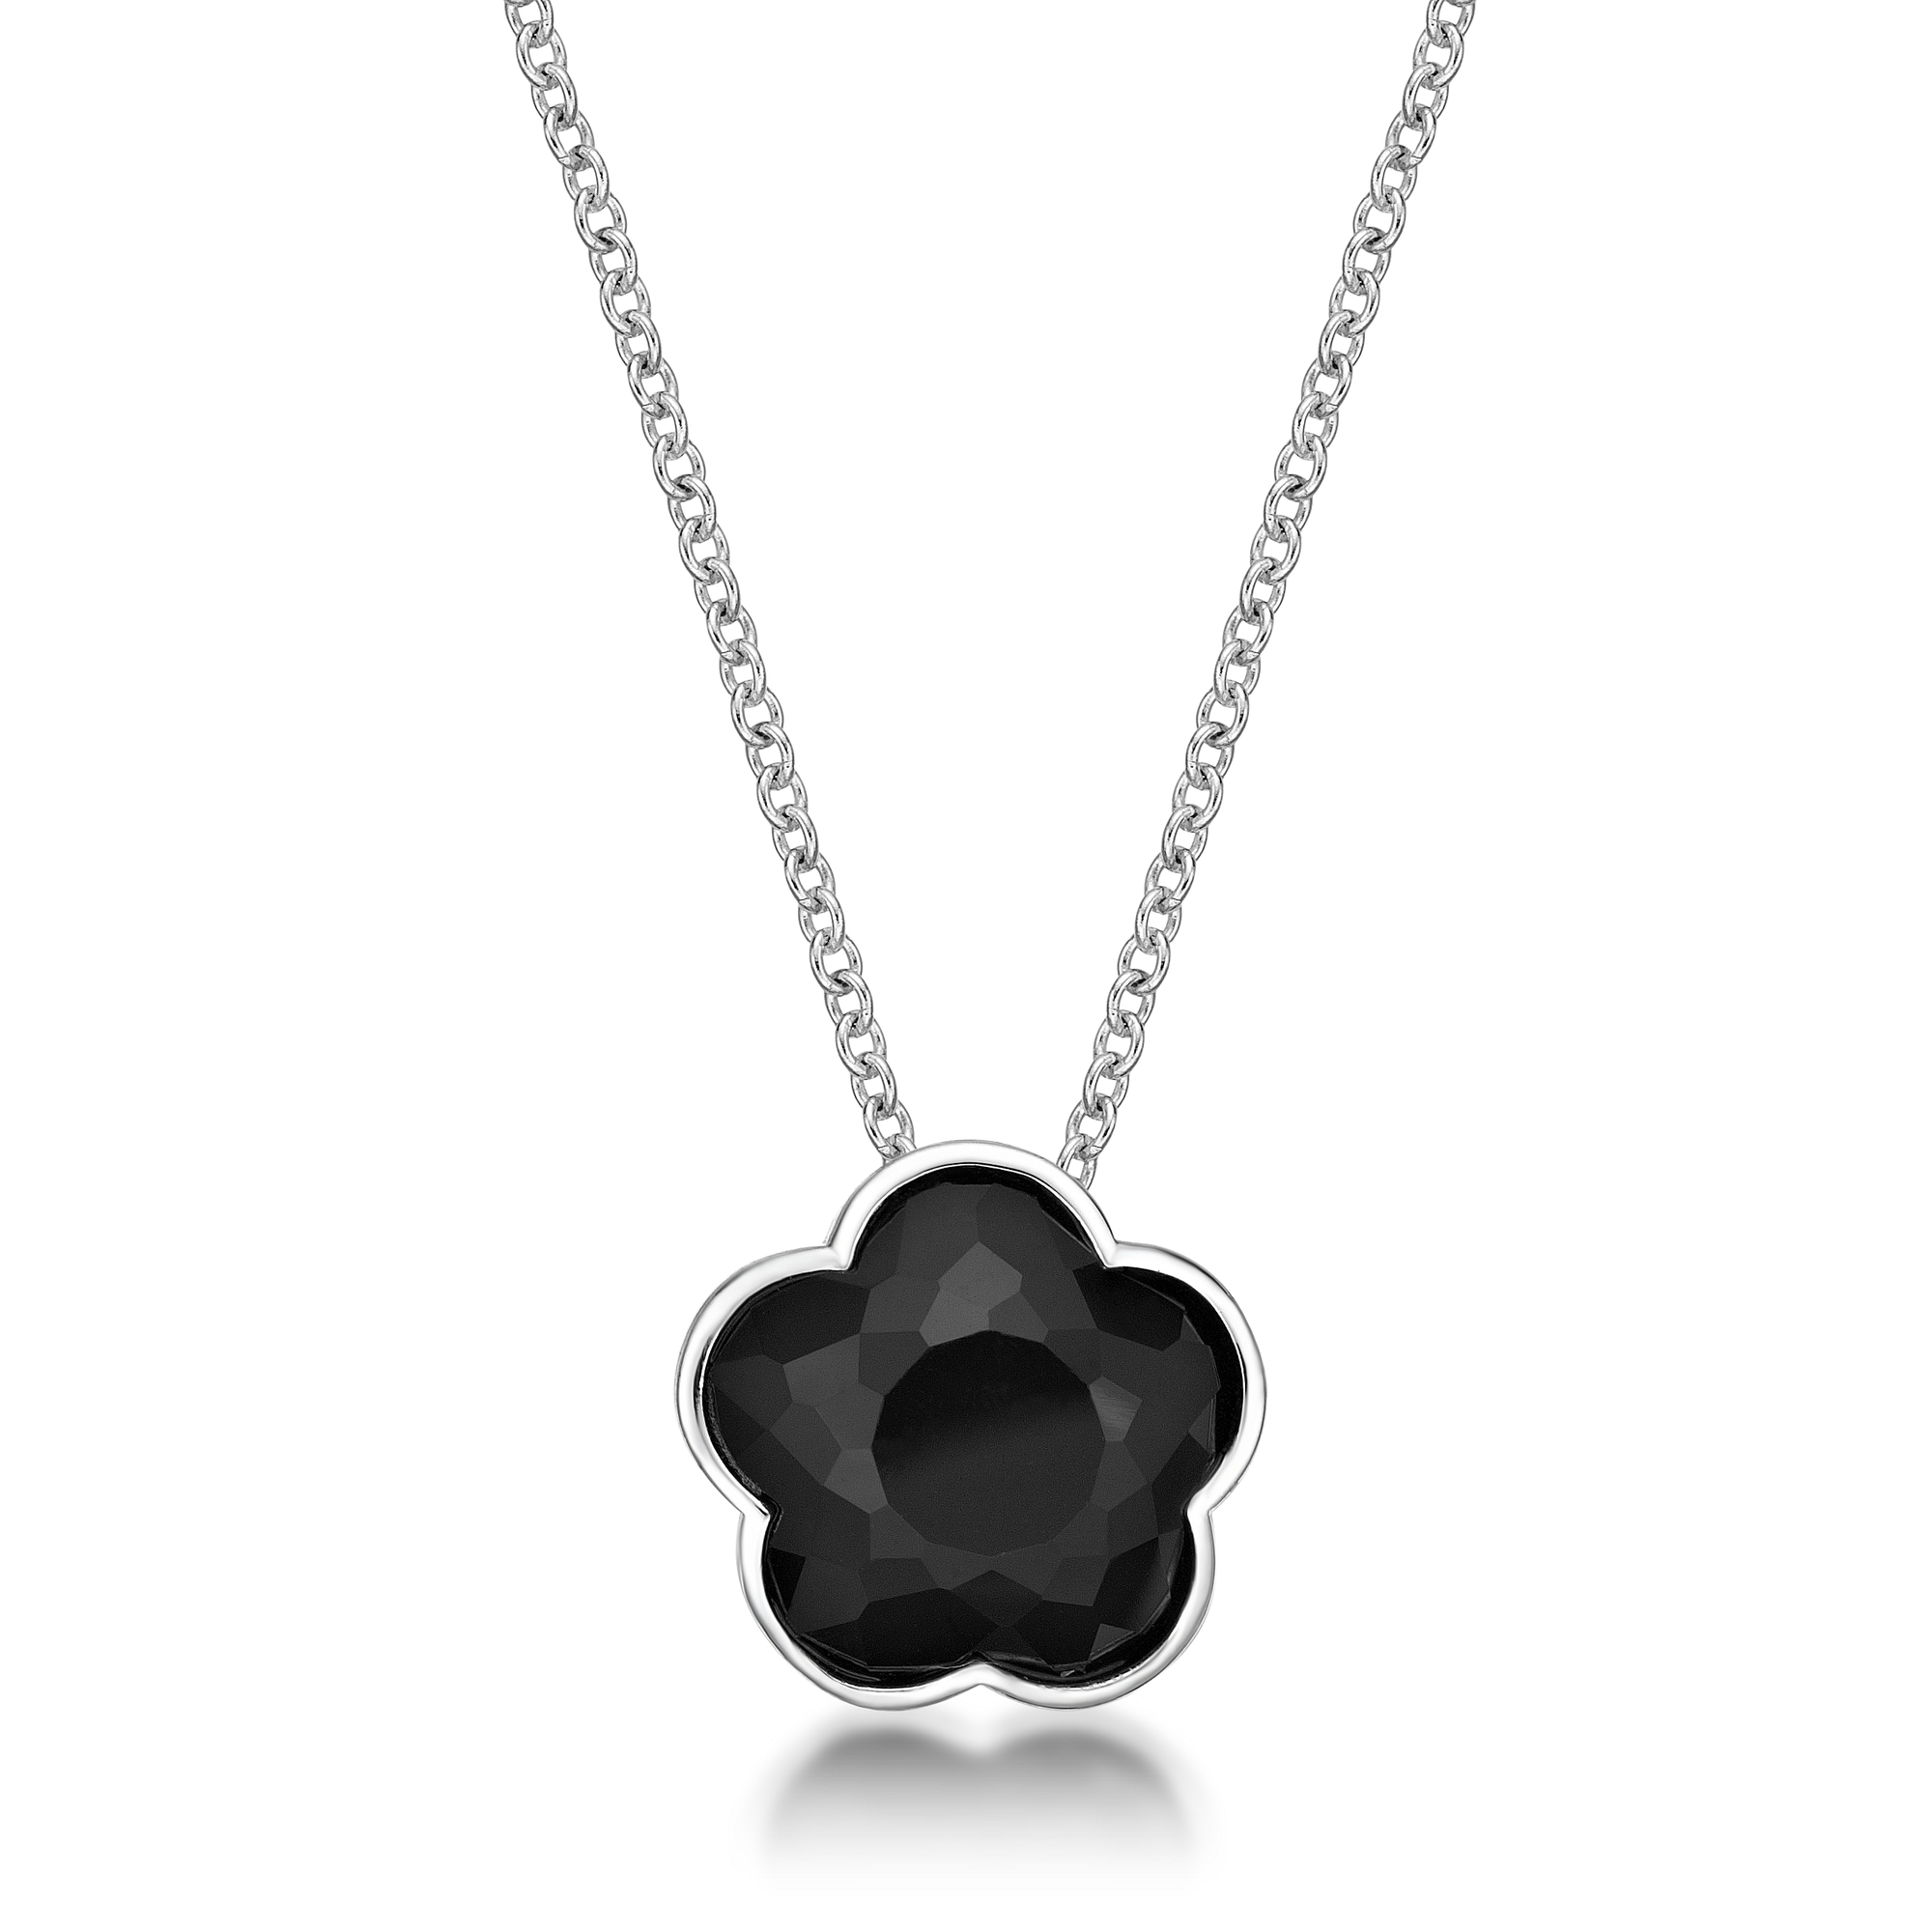 51173-pendant-default-collection-sterling-silver-51173-3-1.jpg